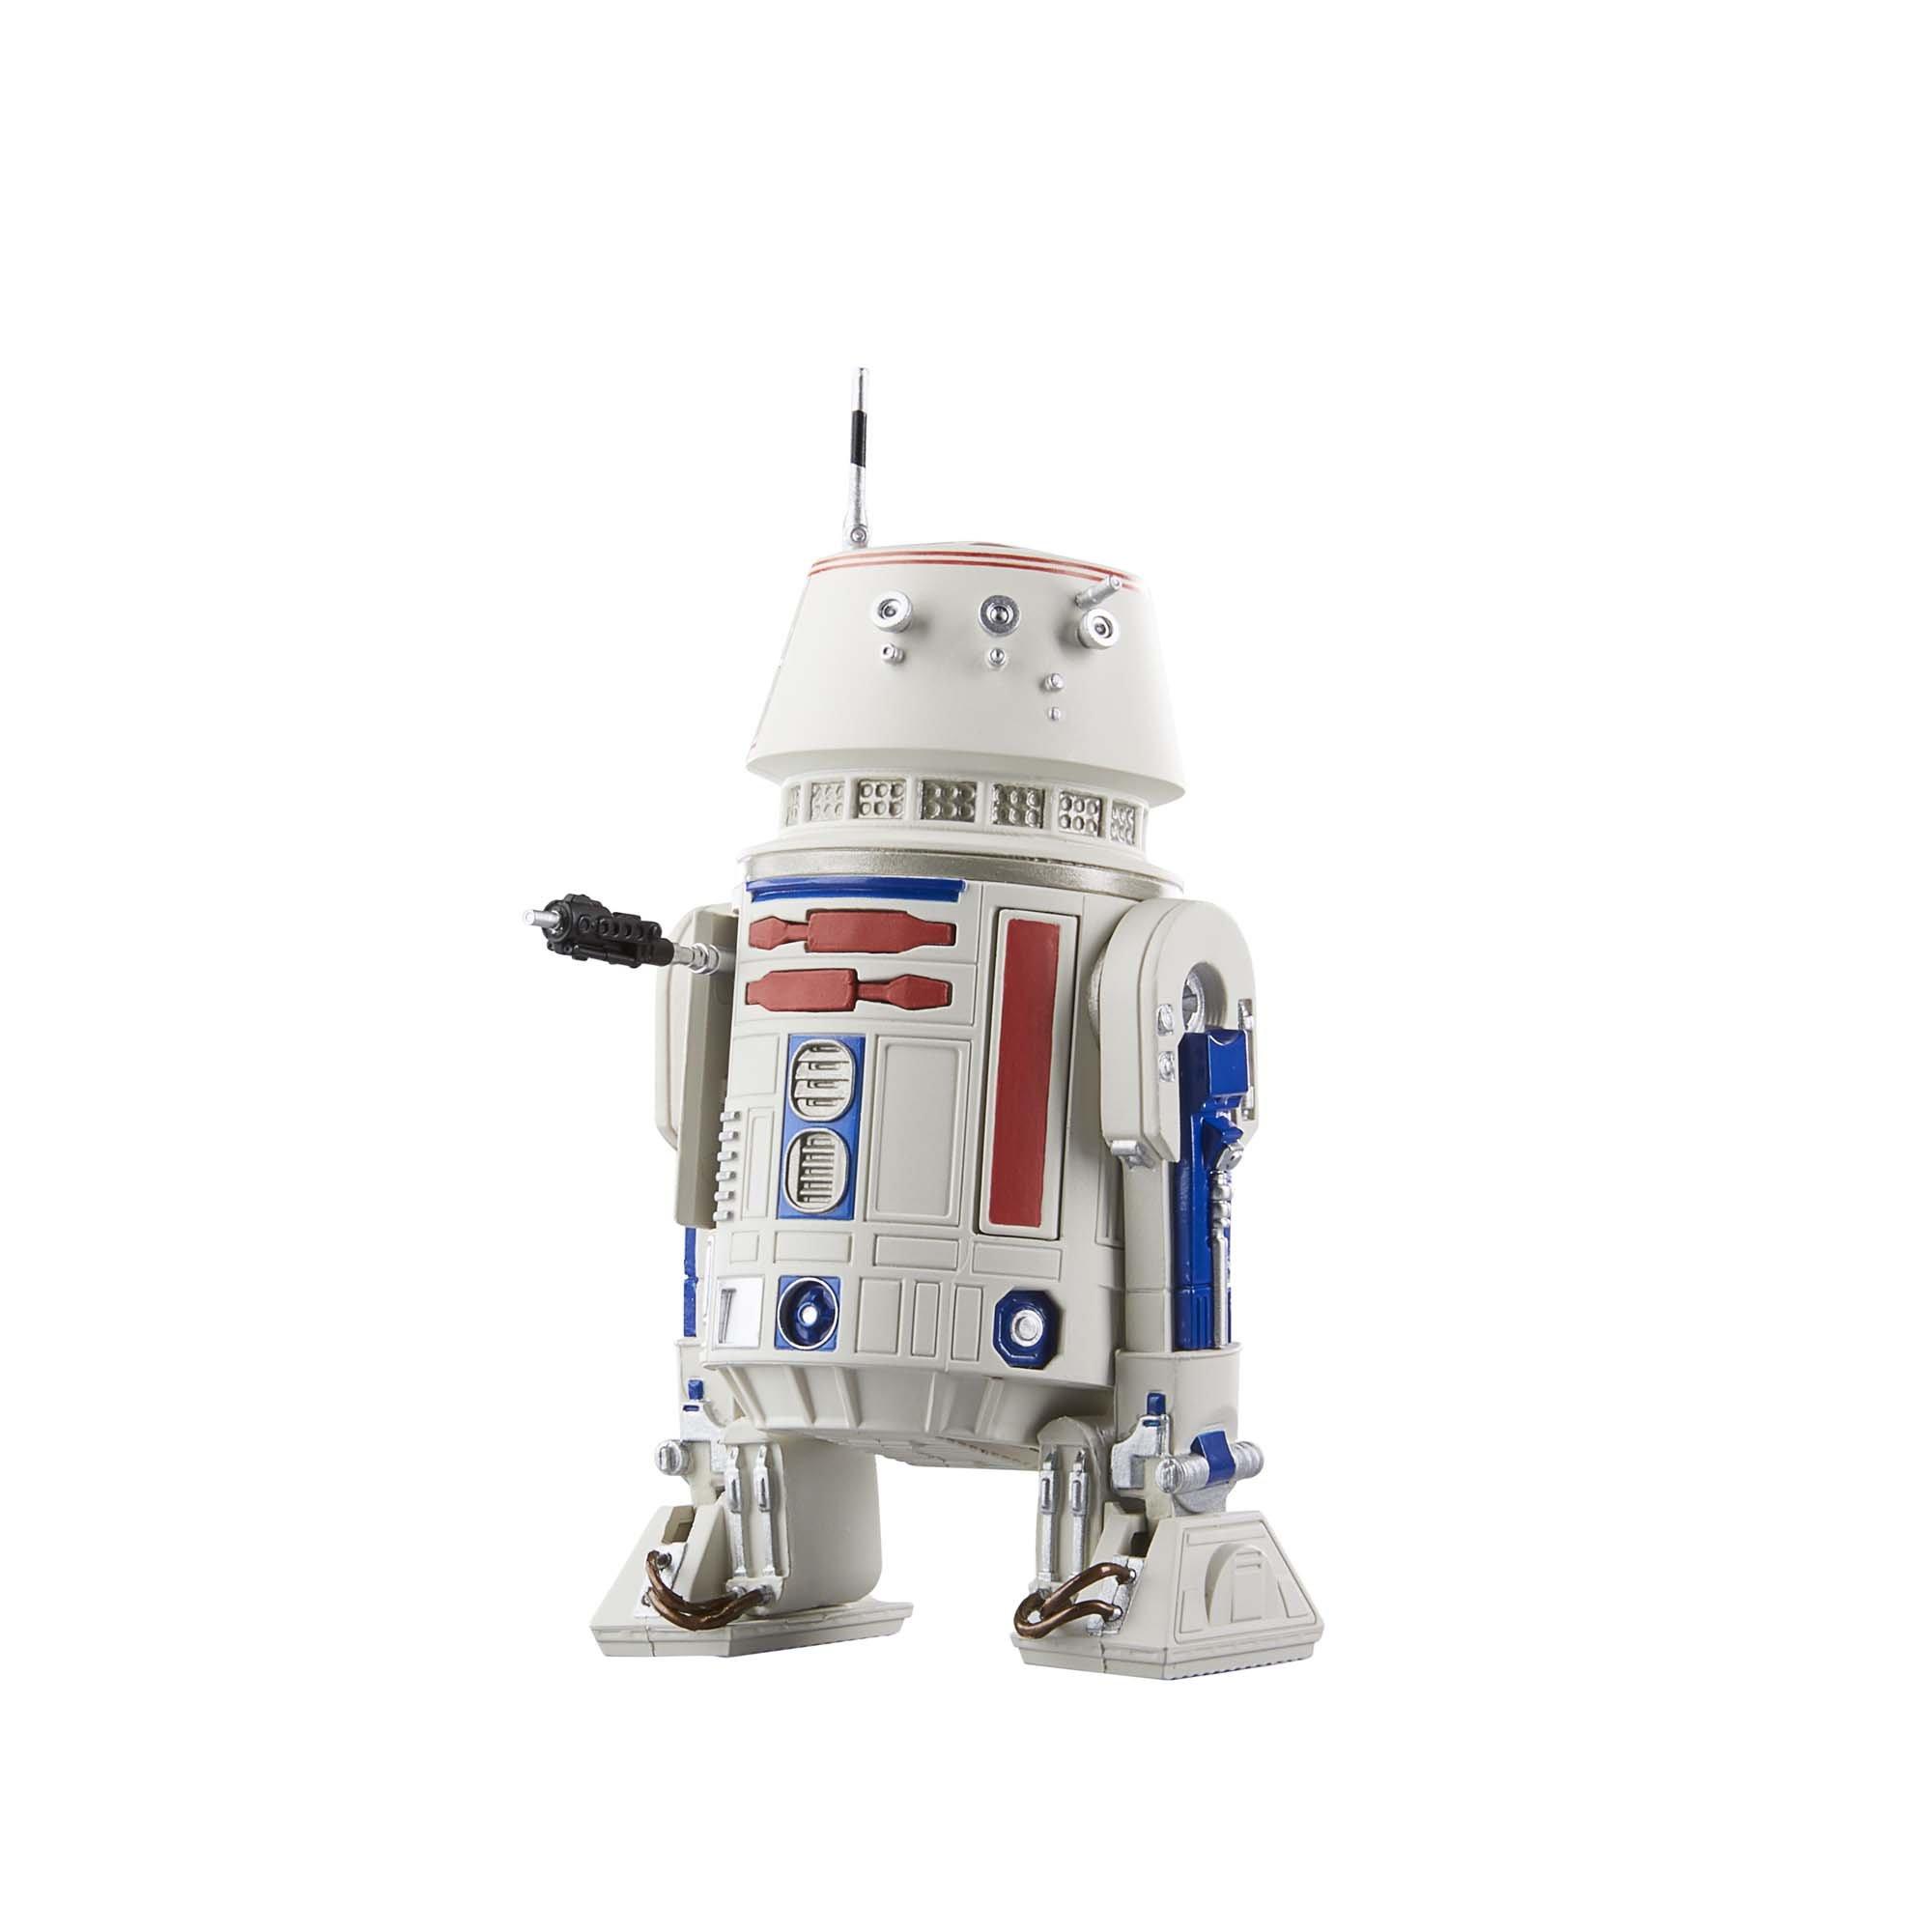 Hasbro Star Wars: The Black Series Star Wars: The Mandalorian R5-D4 - 6-in Action Figure